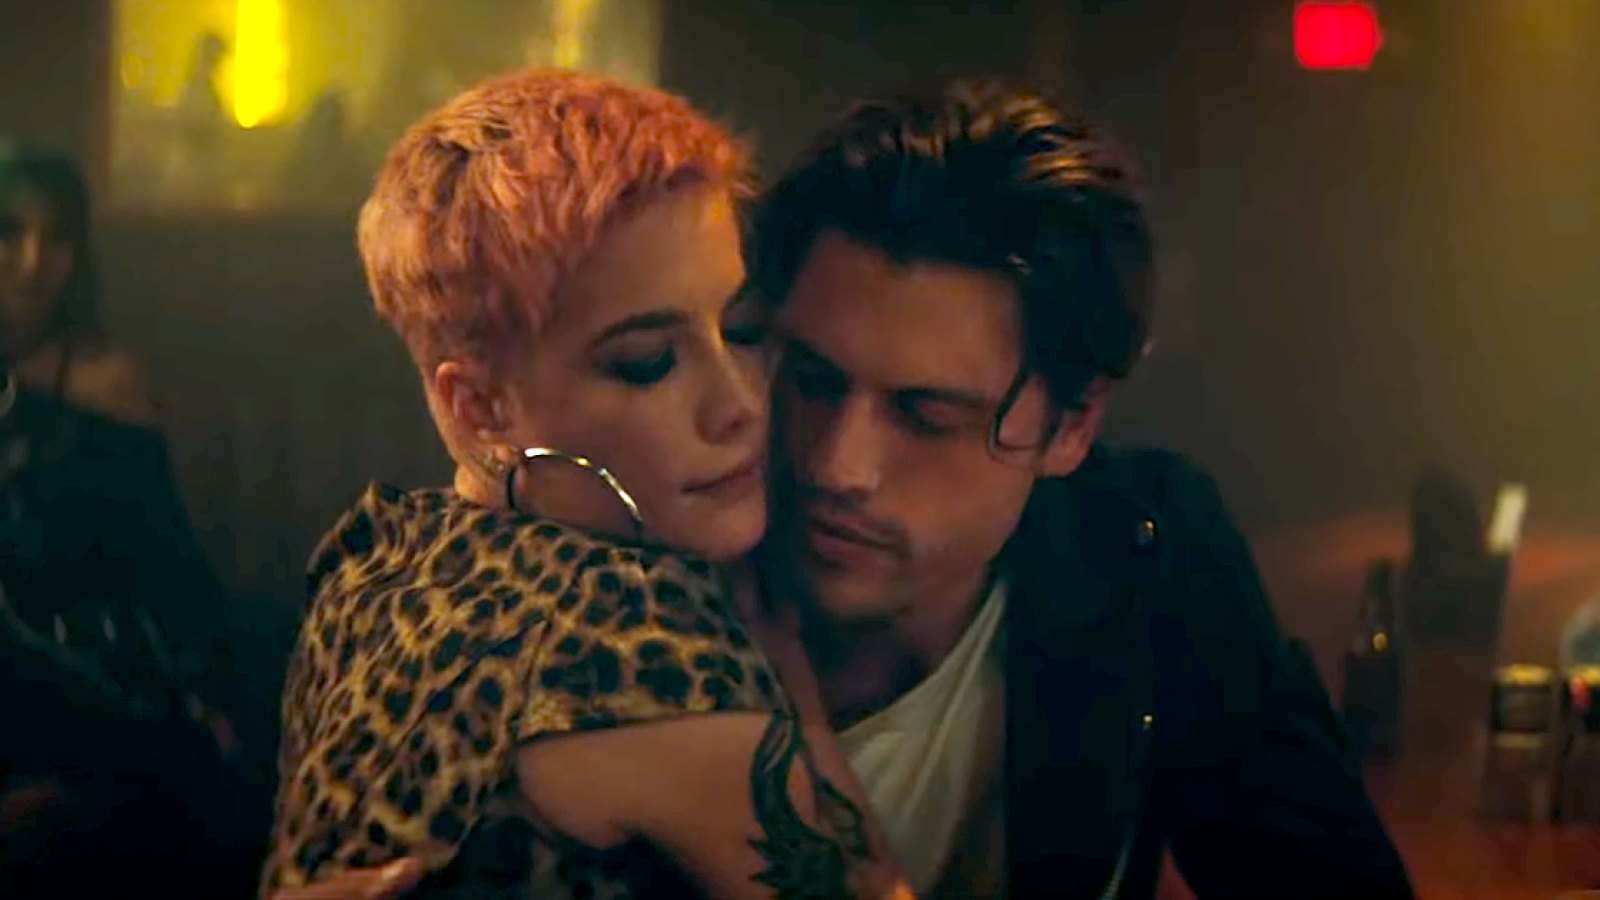 halsey-without-me-geazy